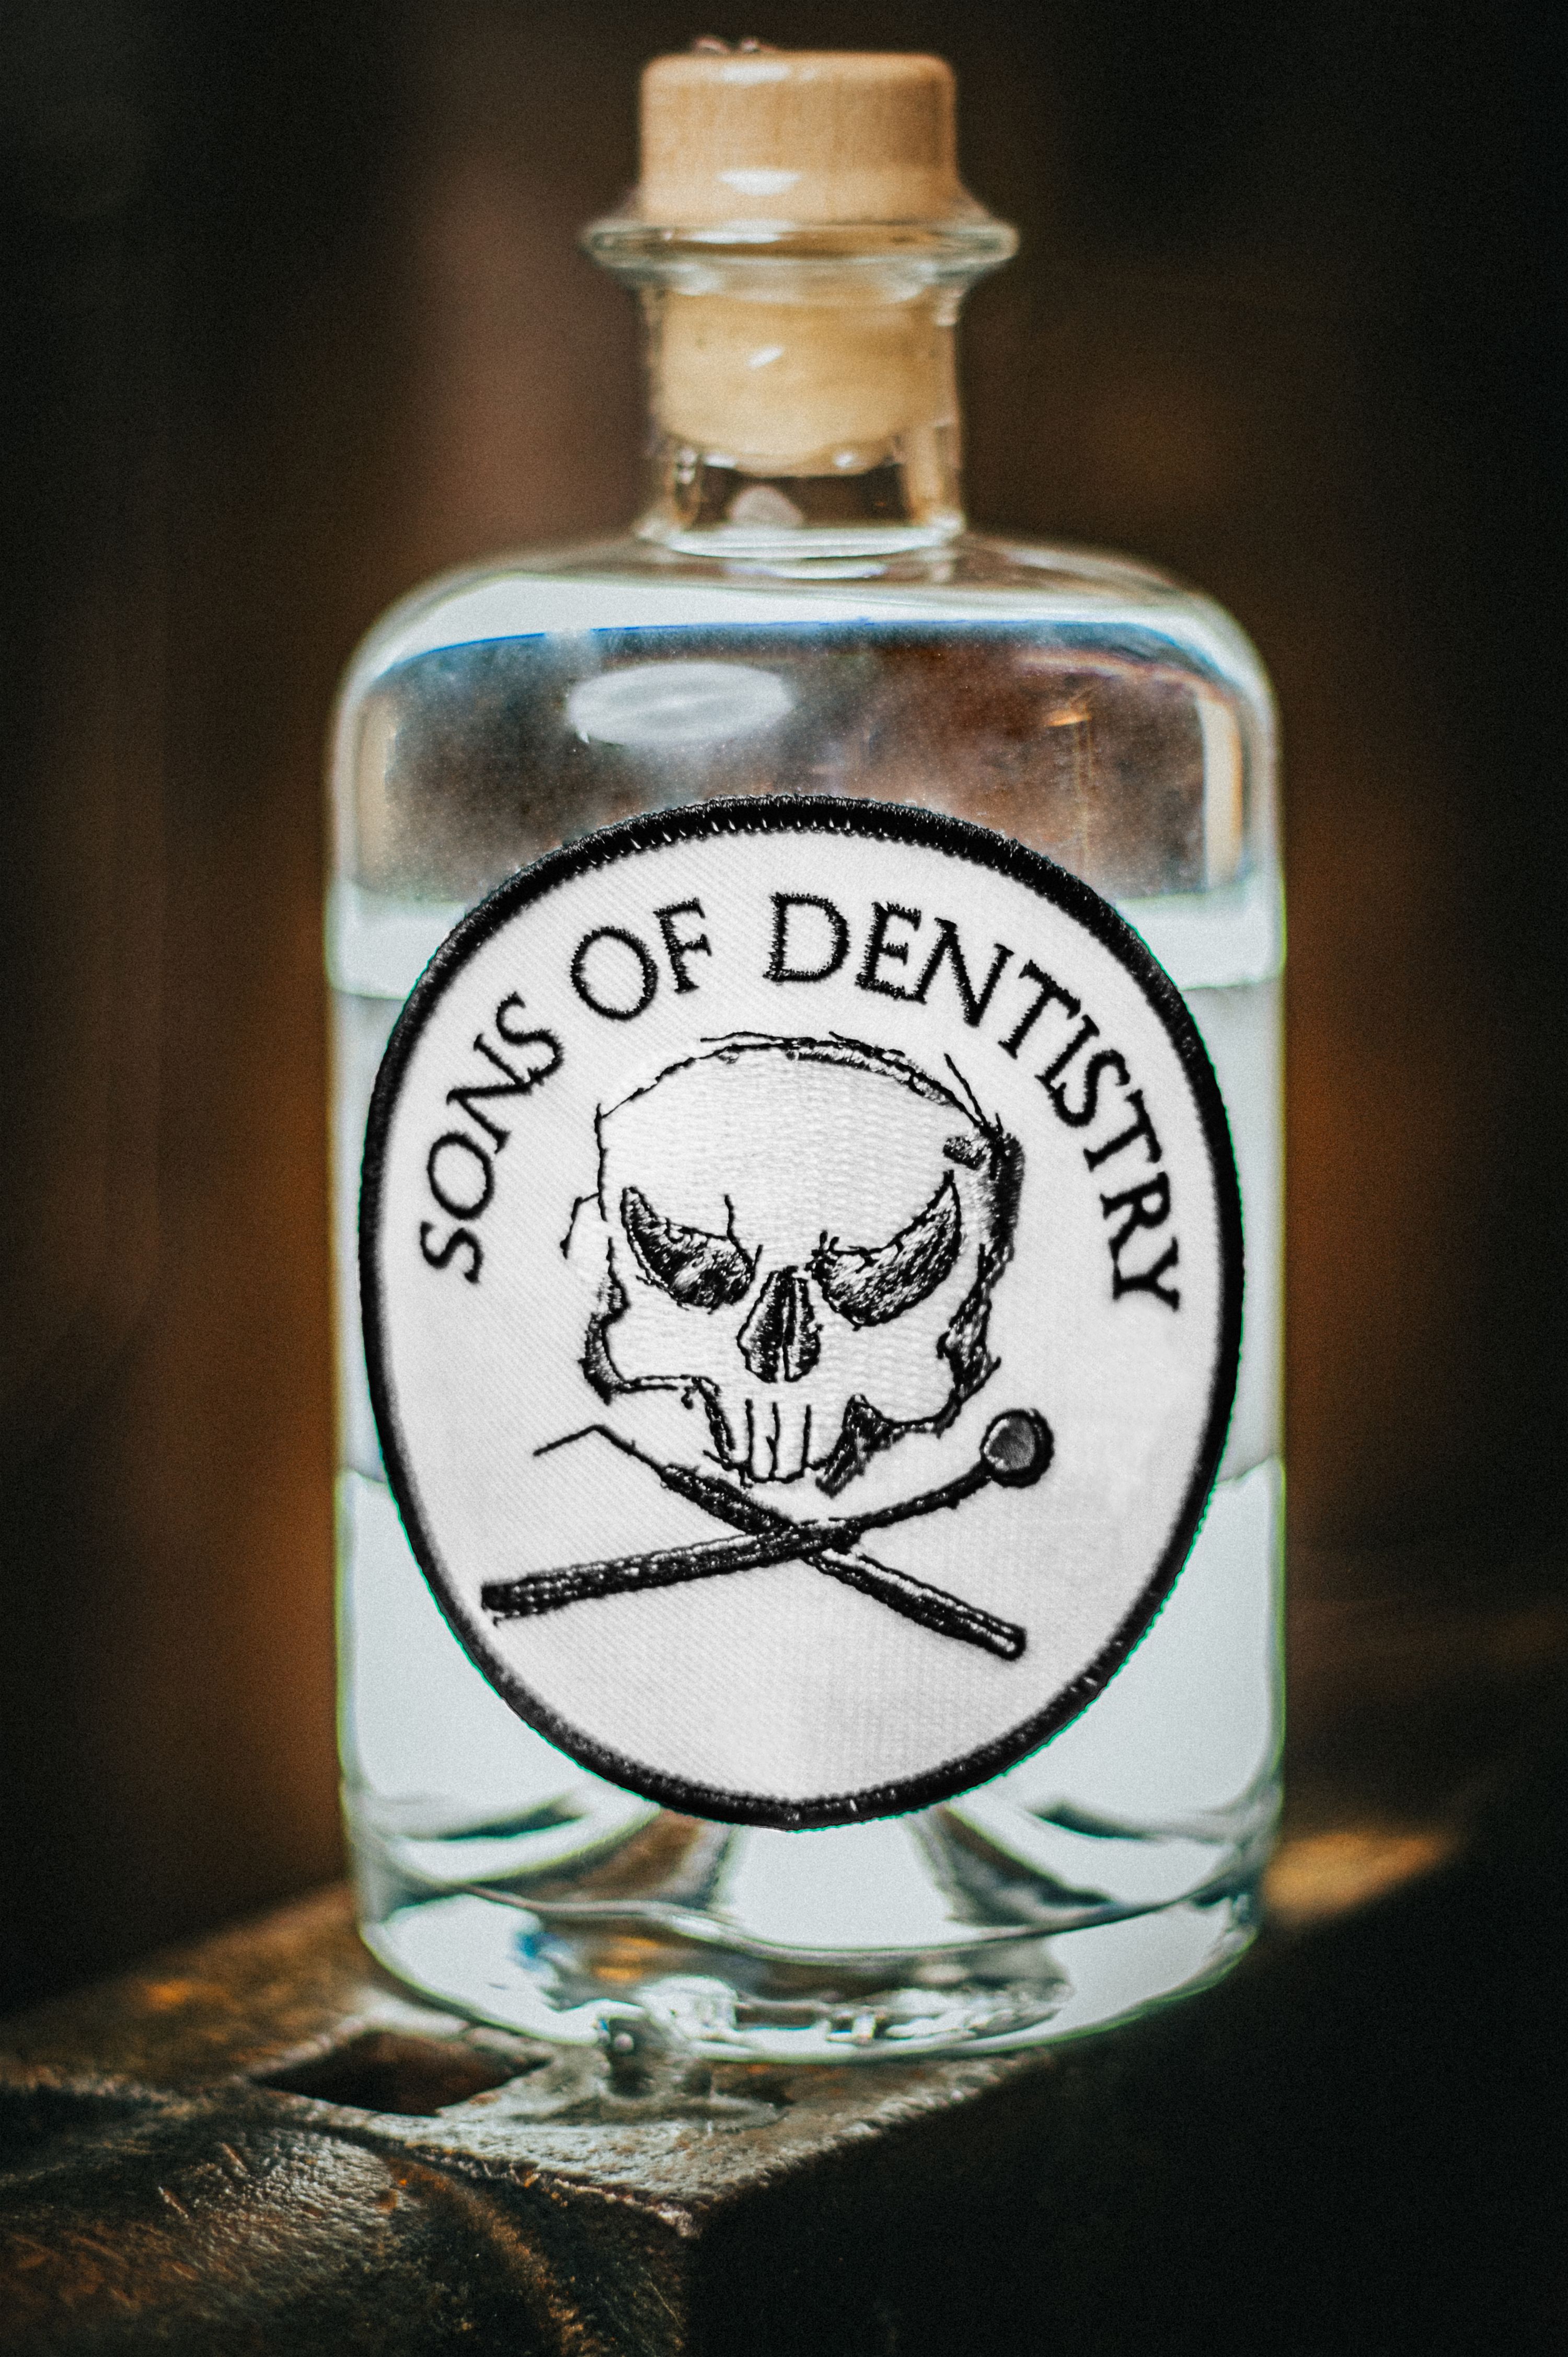 Sons of Dentistry Gin